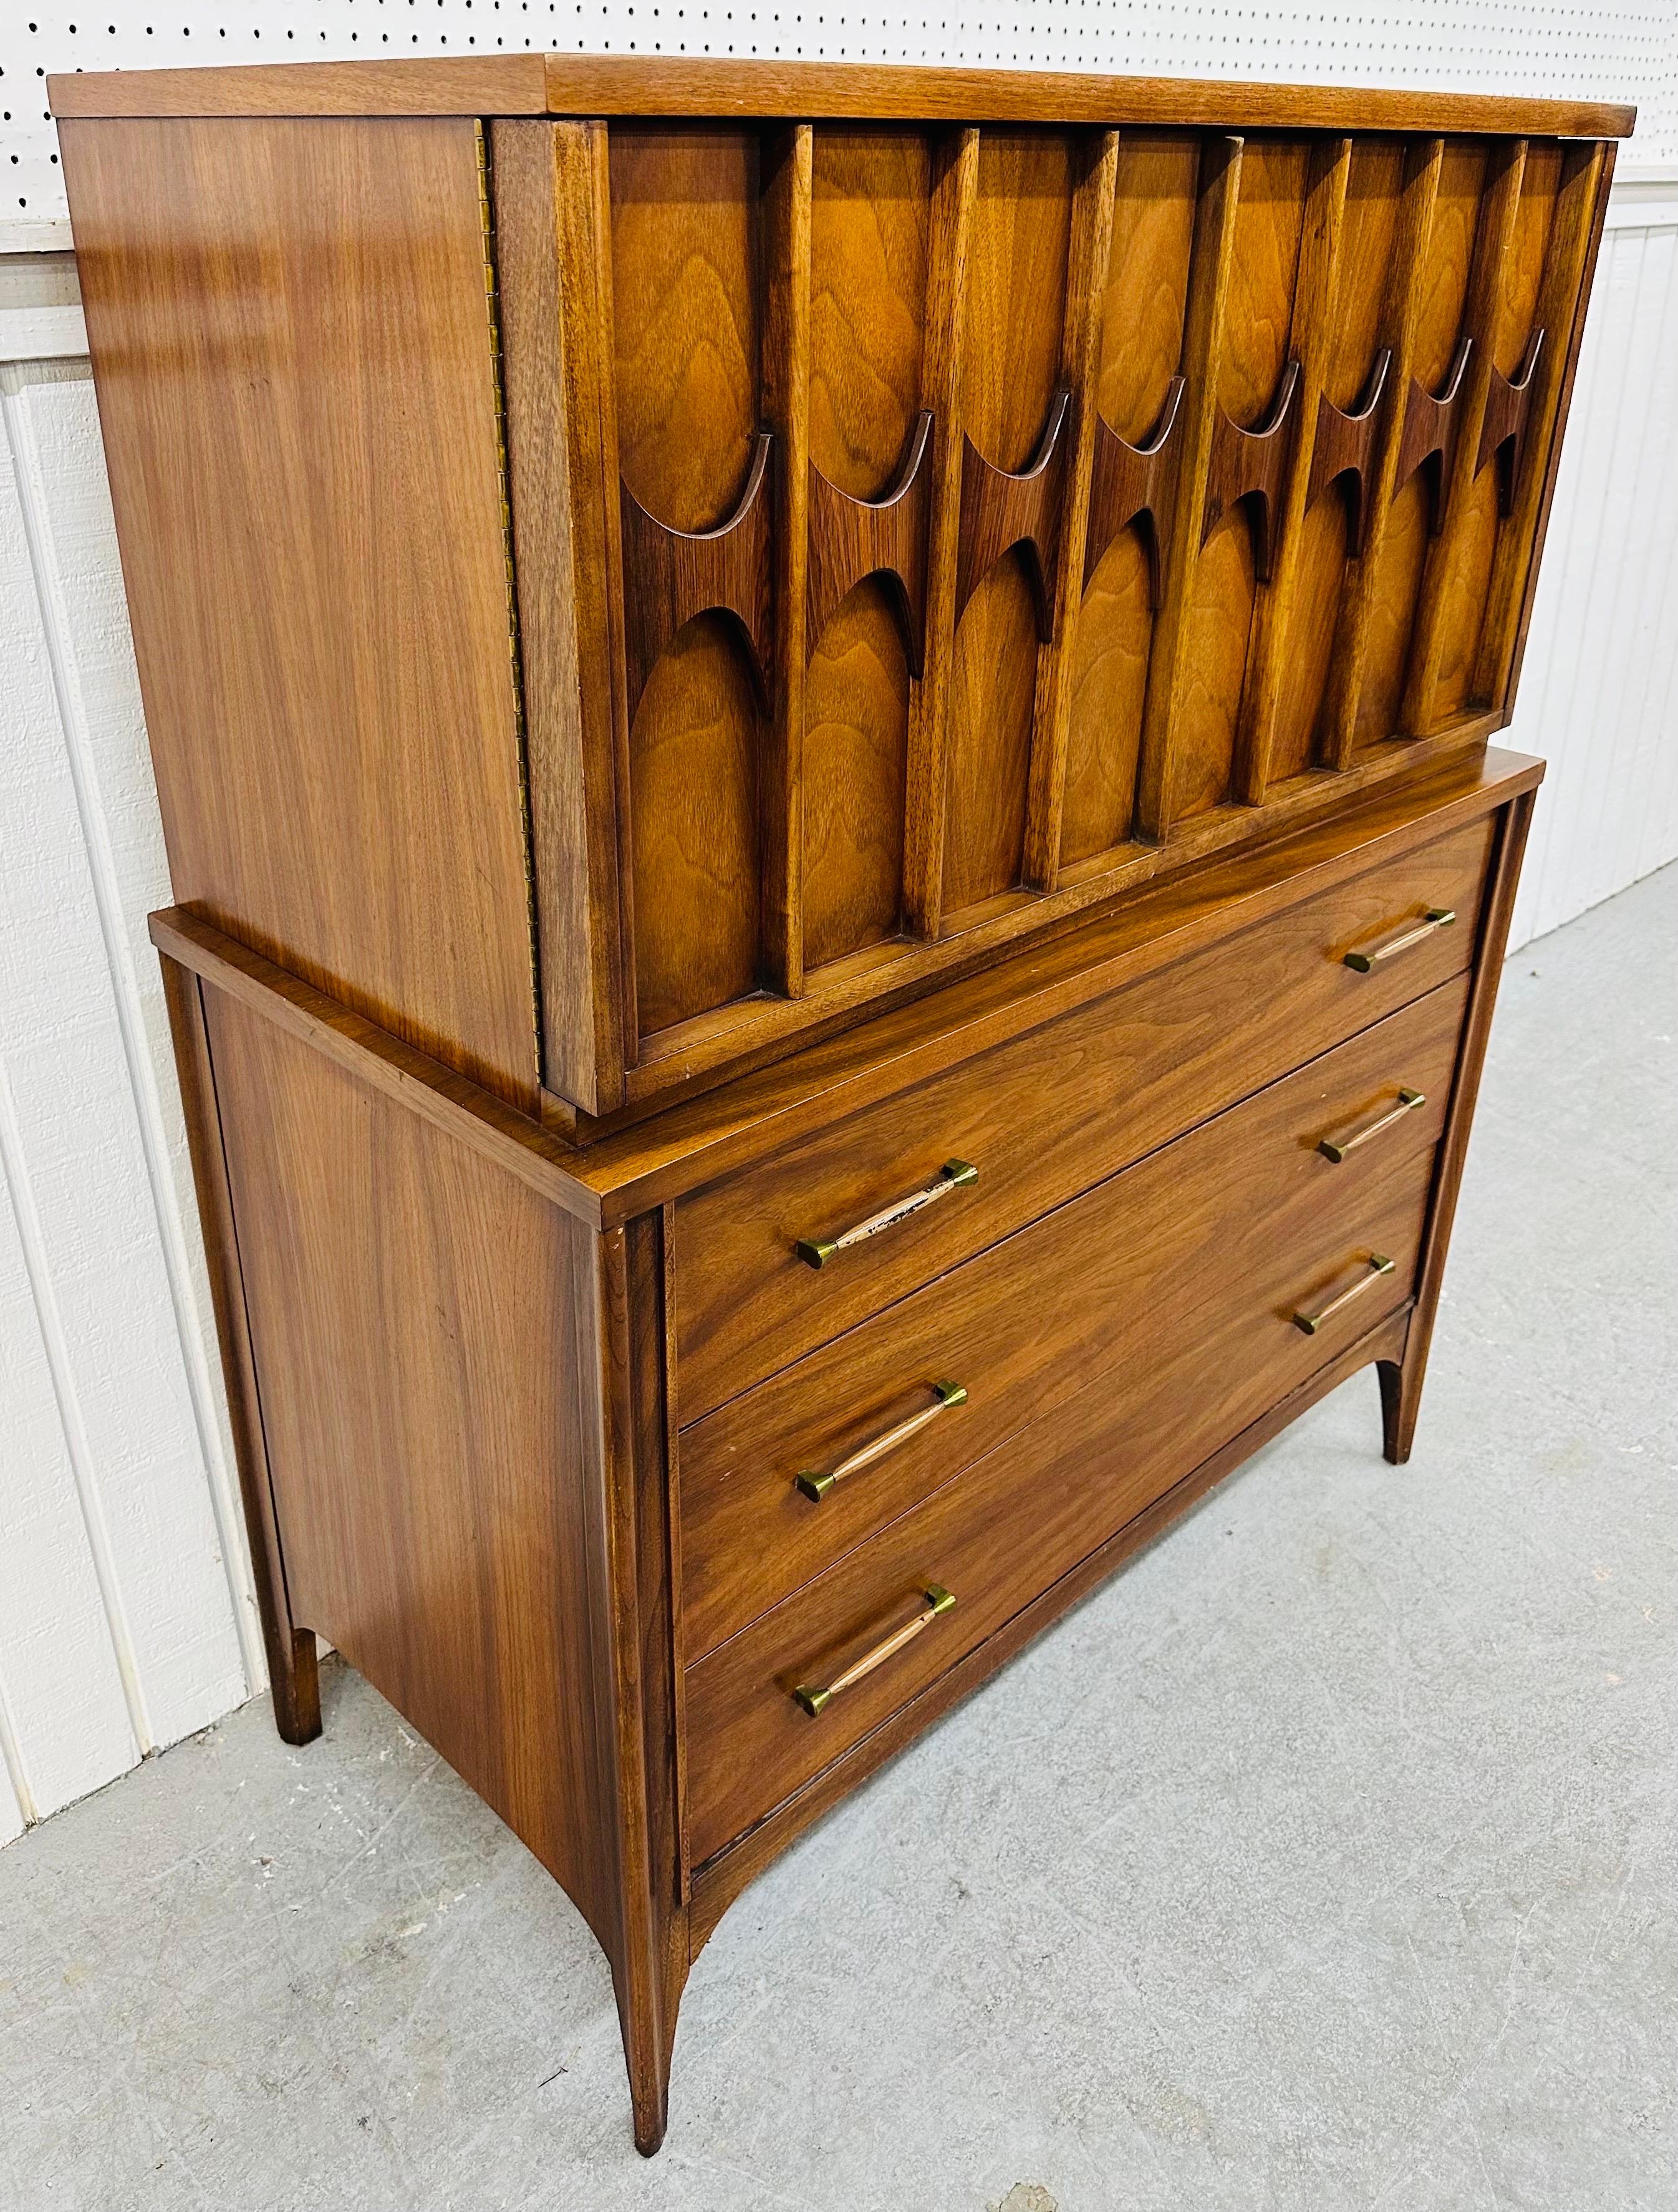 This listing is for a Mid-Century Modern Kent Coffey Perspecta Walnut Gentlemen’s Chest. Featuring a straight line design, two doors with sculpted rosewood pulls that open up to two hidden drawers and storage space. The bottom half of the chest has